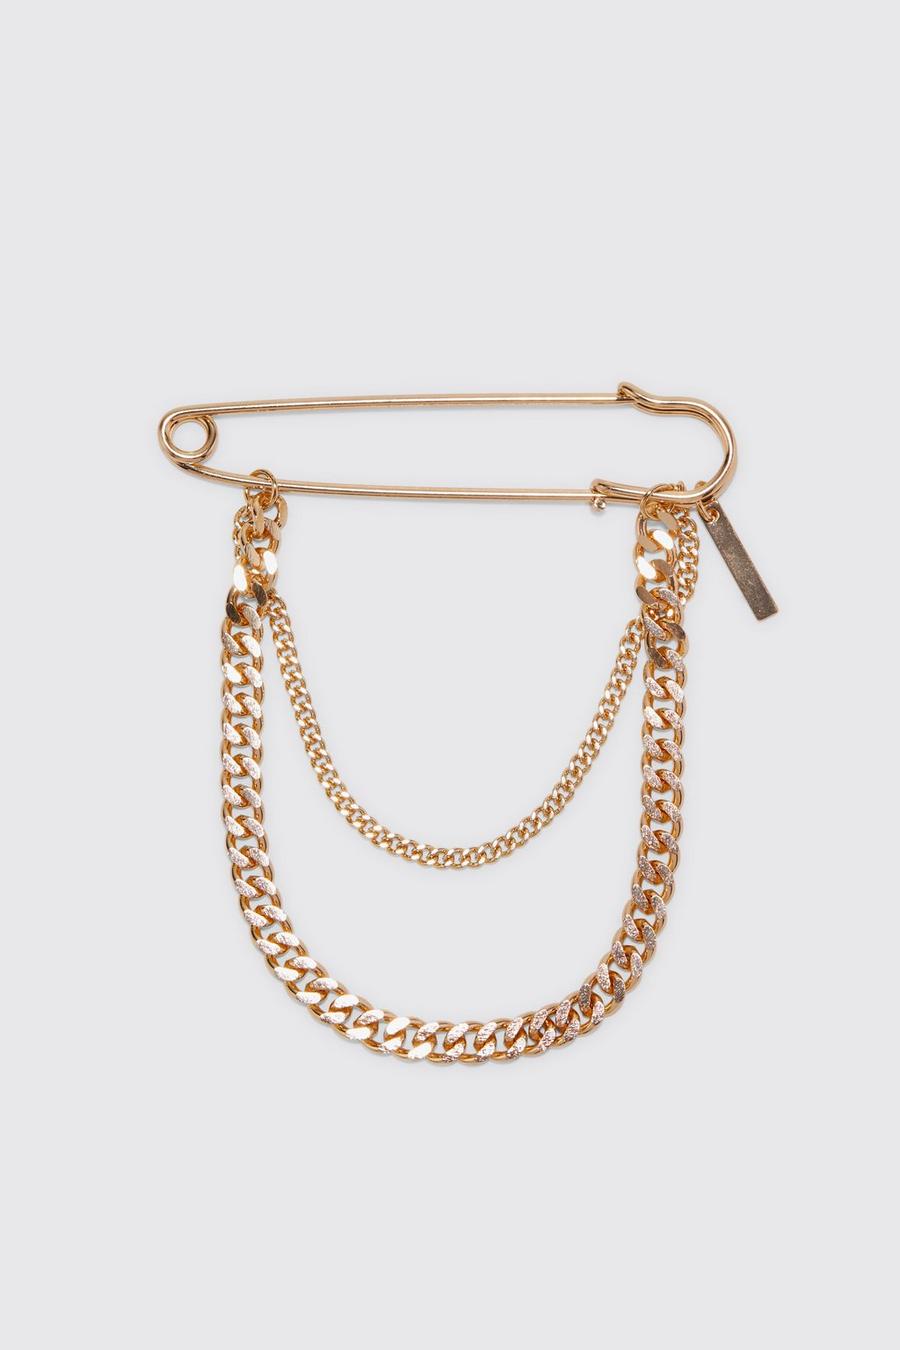 Gold metallic Safety Pin Chain Suit Brooch